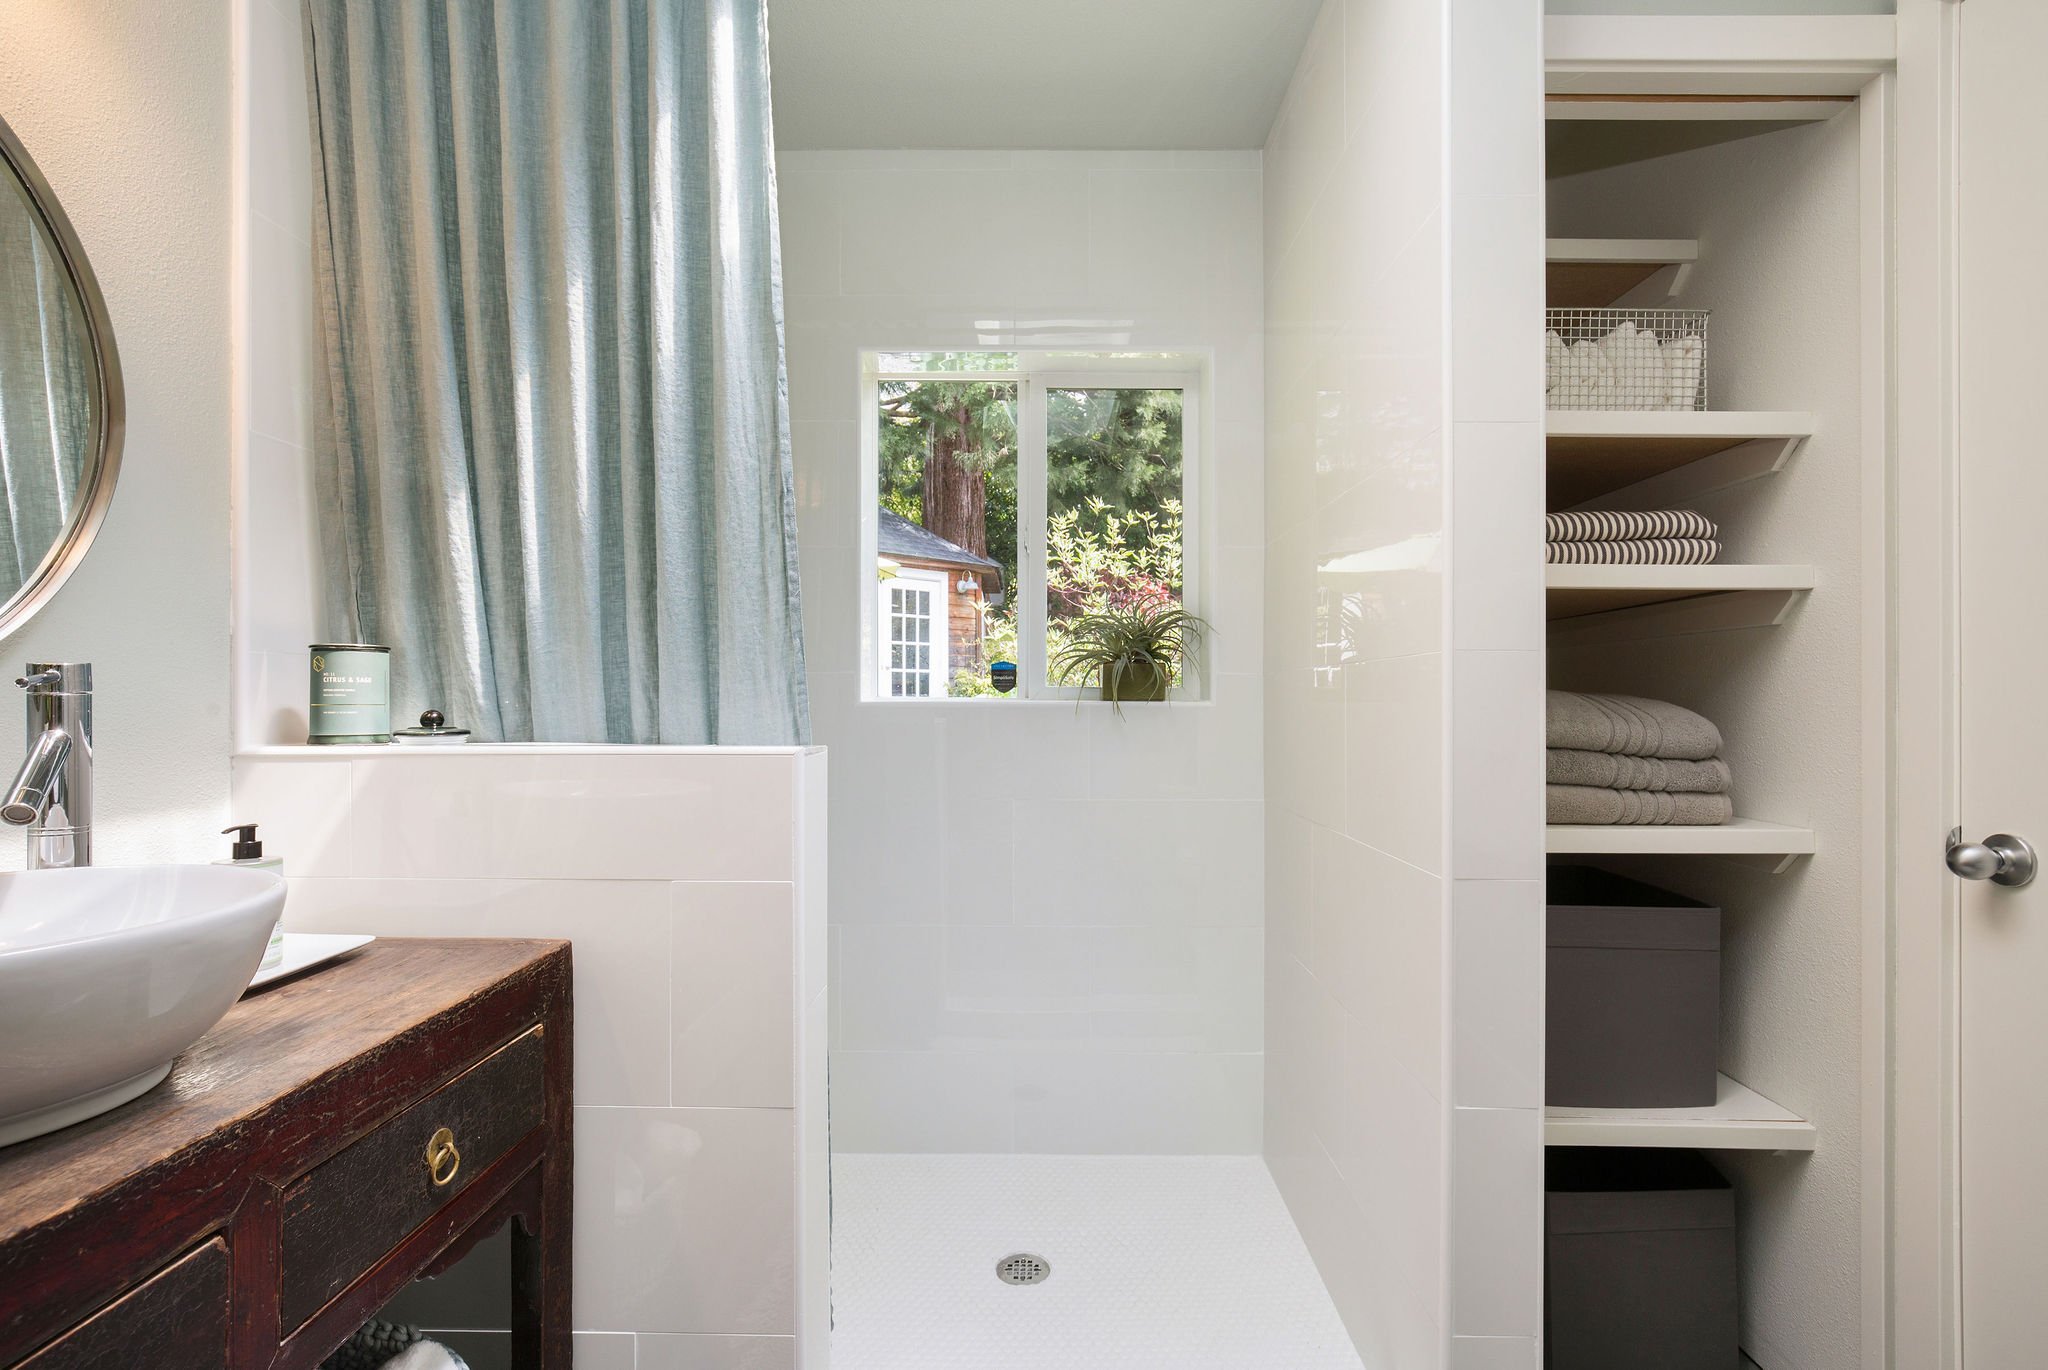  image description: interior of bathroom with standing shower and shelves 